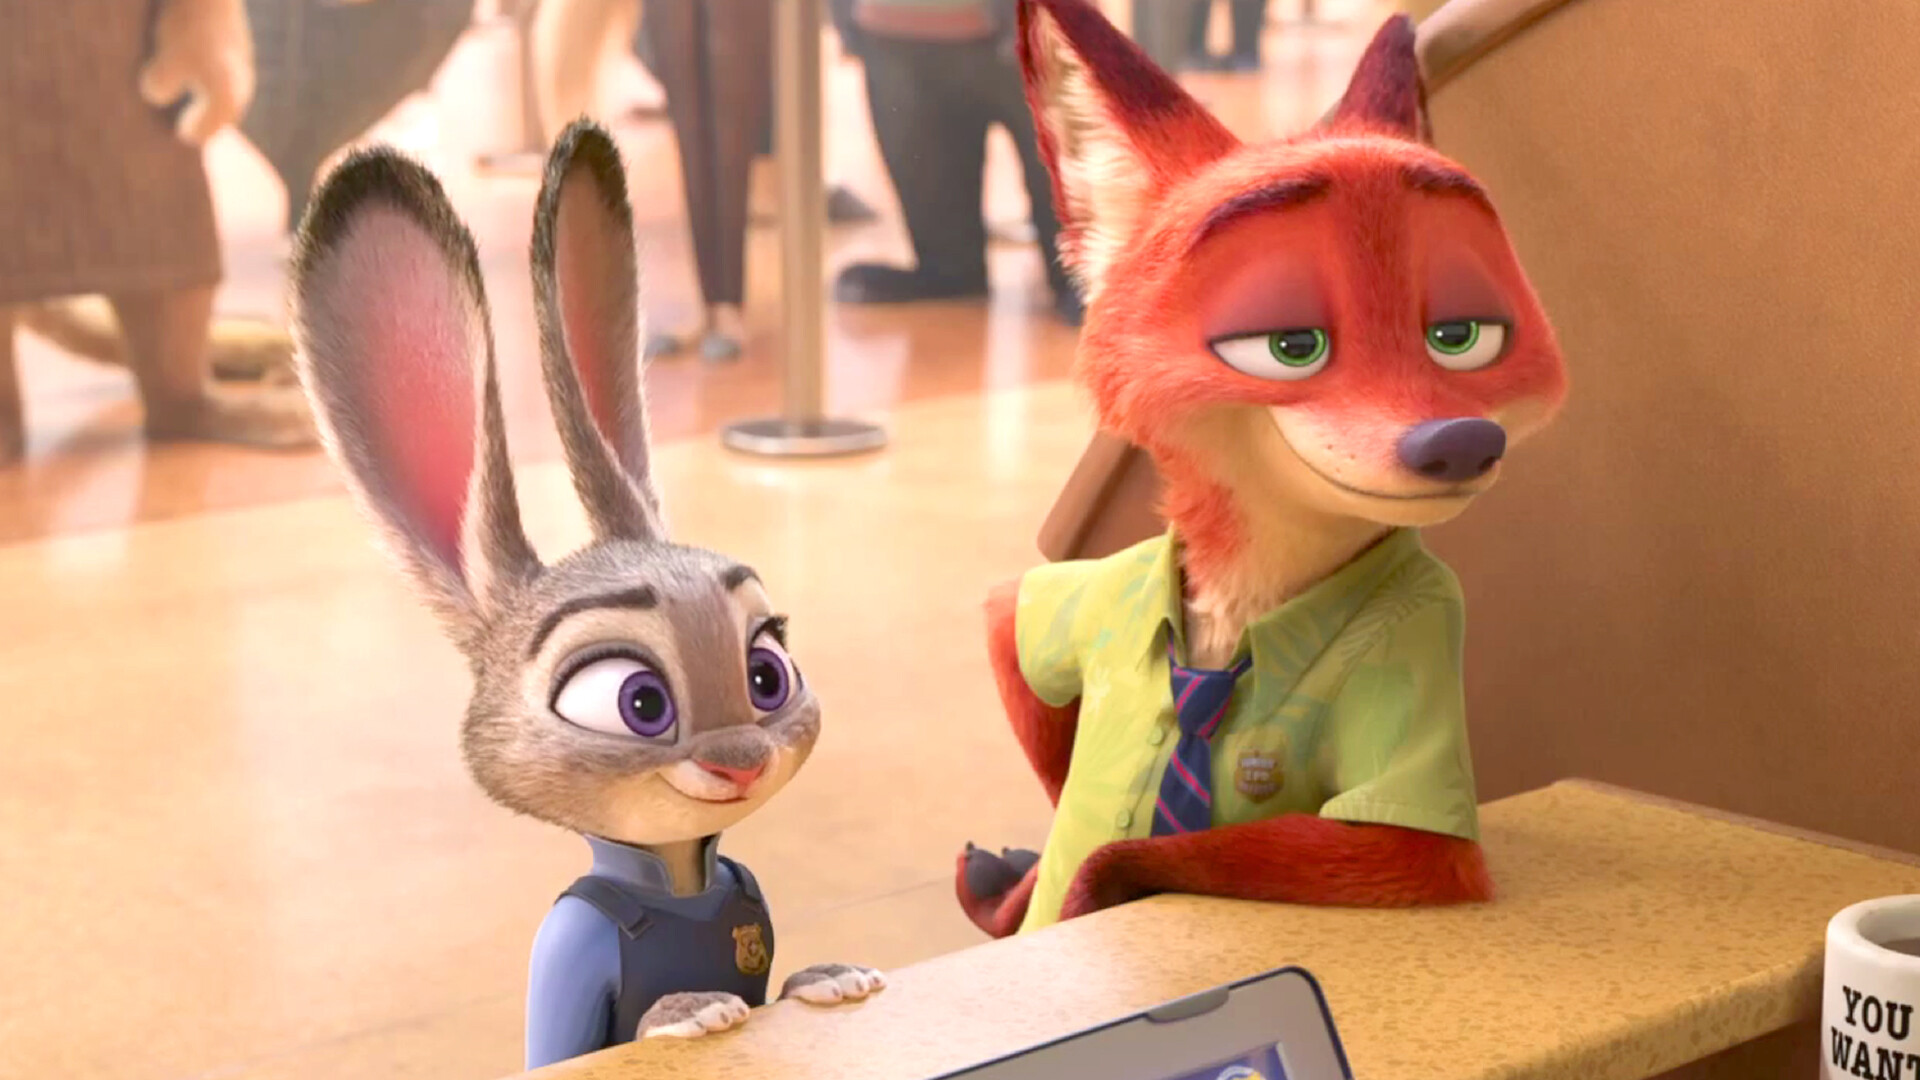 Zootopia: Determined to prove herself, Officer Judy Hopps, the first bunny on Zootopia’s police force, jumps at the chance to crack her first case - even if it means partnering with scam-artist fox Nick Wilde to solve the mystery. 1920x1080 Full HD Background.